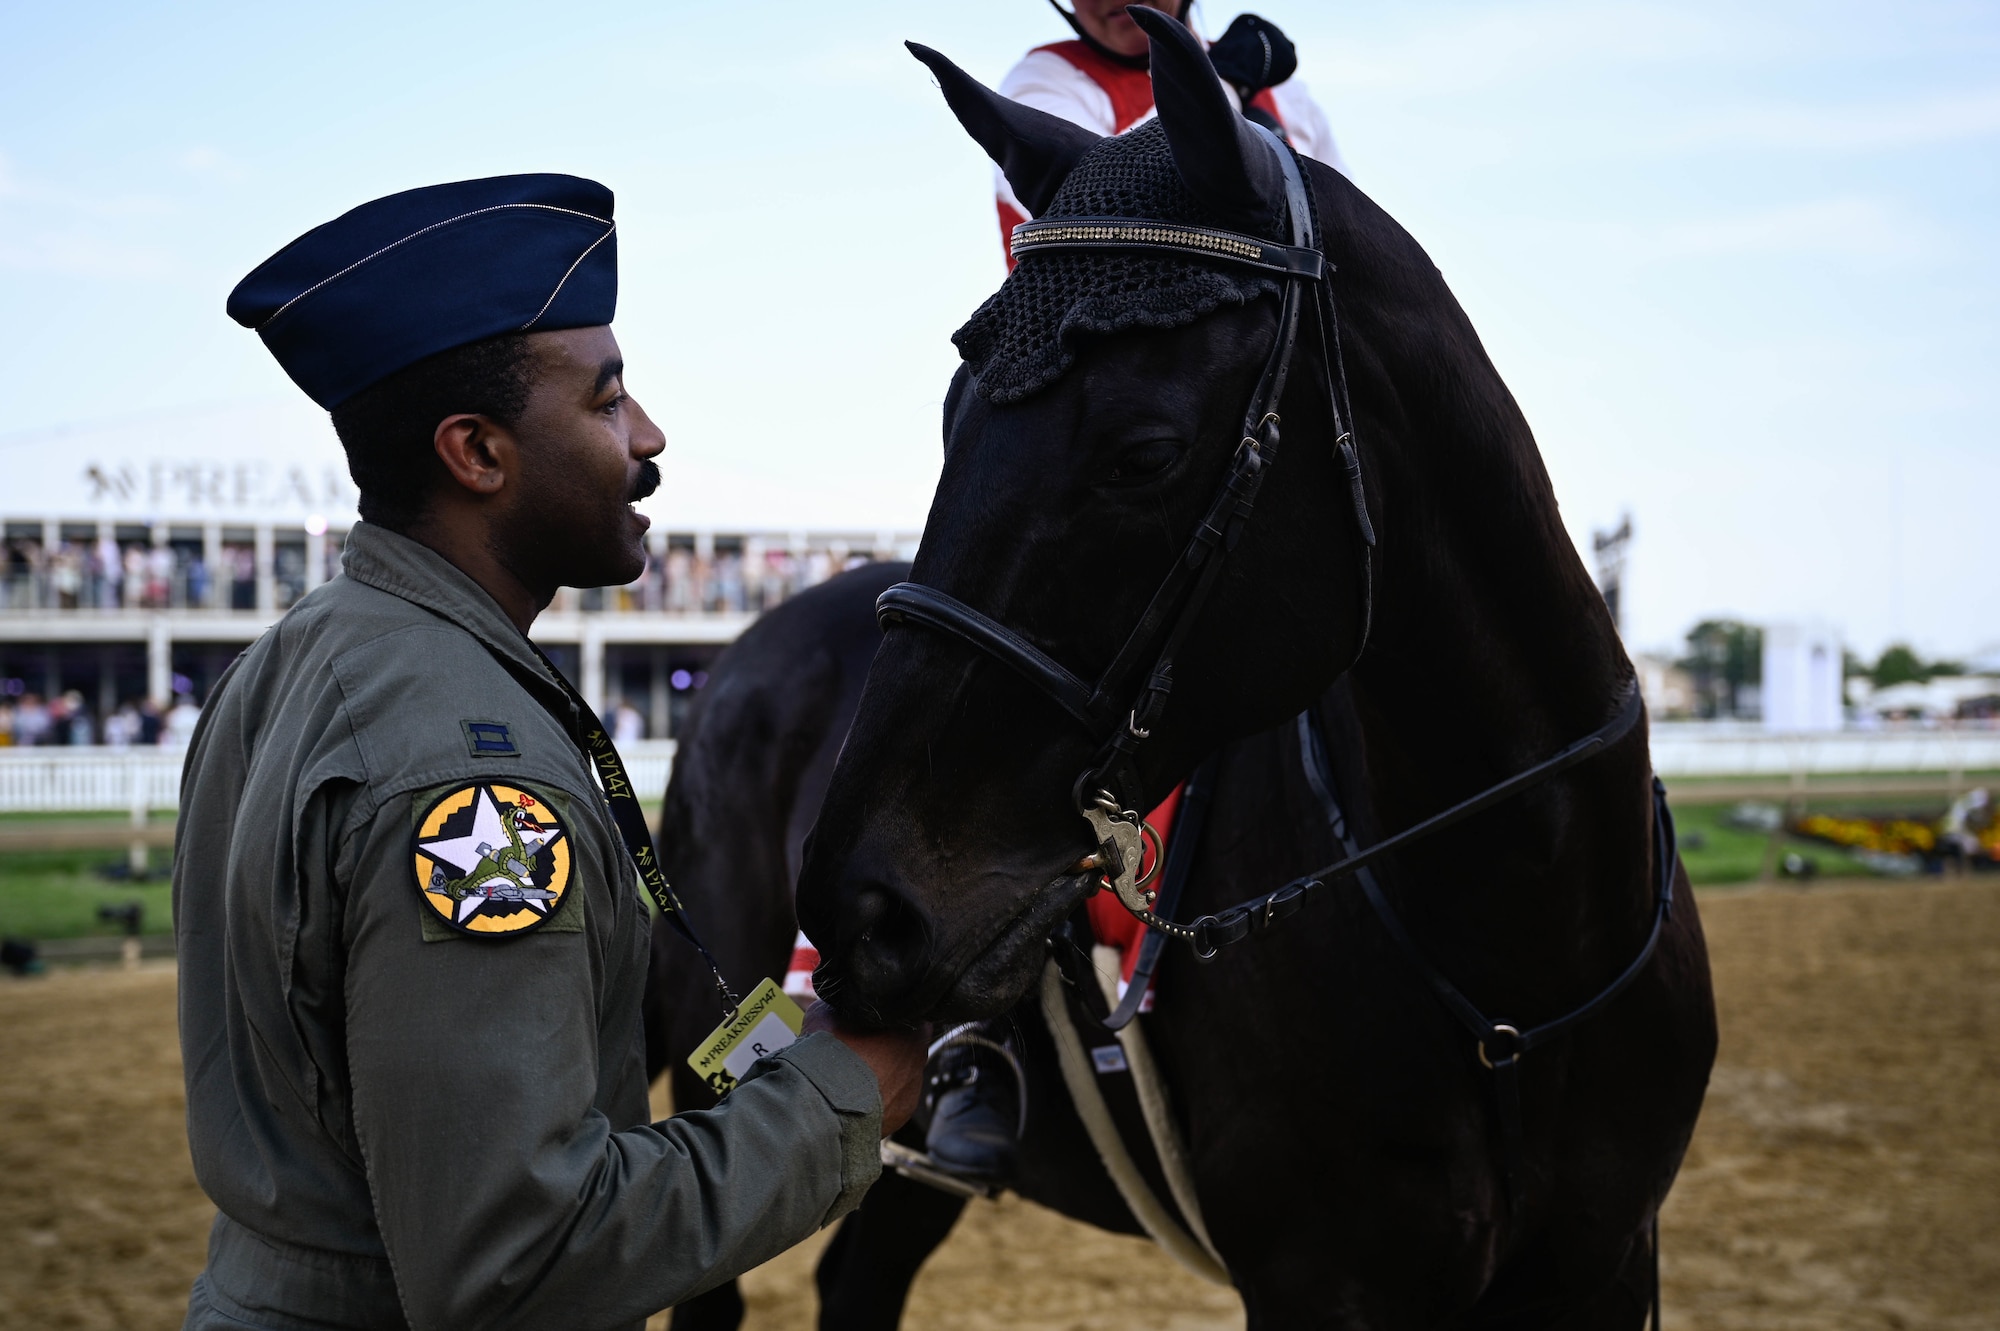 A U.S. Air Force B-2 Spirit pilot meets one of the working horses during the Preakness at the Pimlico race course, Baltimore, Maryland, May 21, 2022. The Preakness Stakes is an American thoroughbred horse race held on the third Saturday in May each year in Baltimore, Maryland.